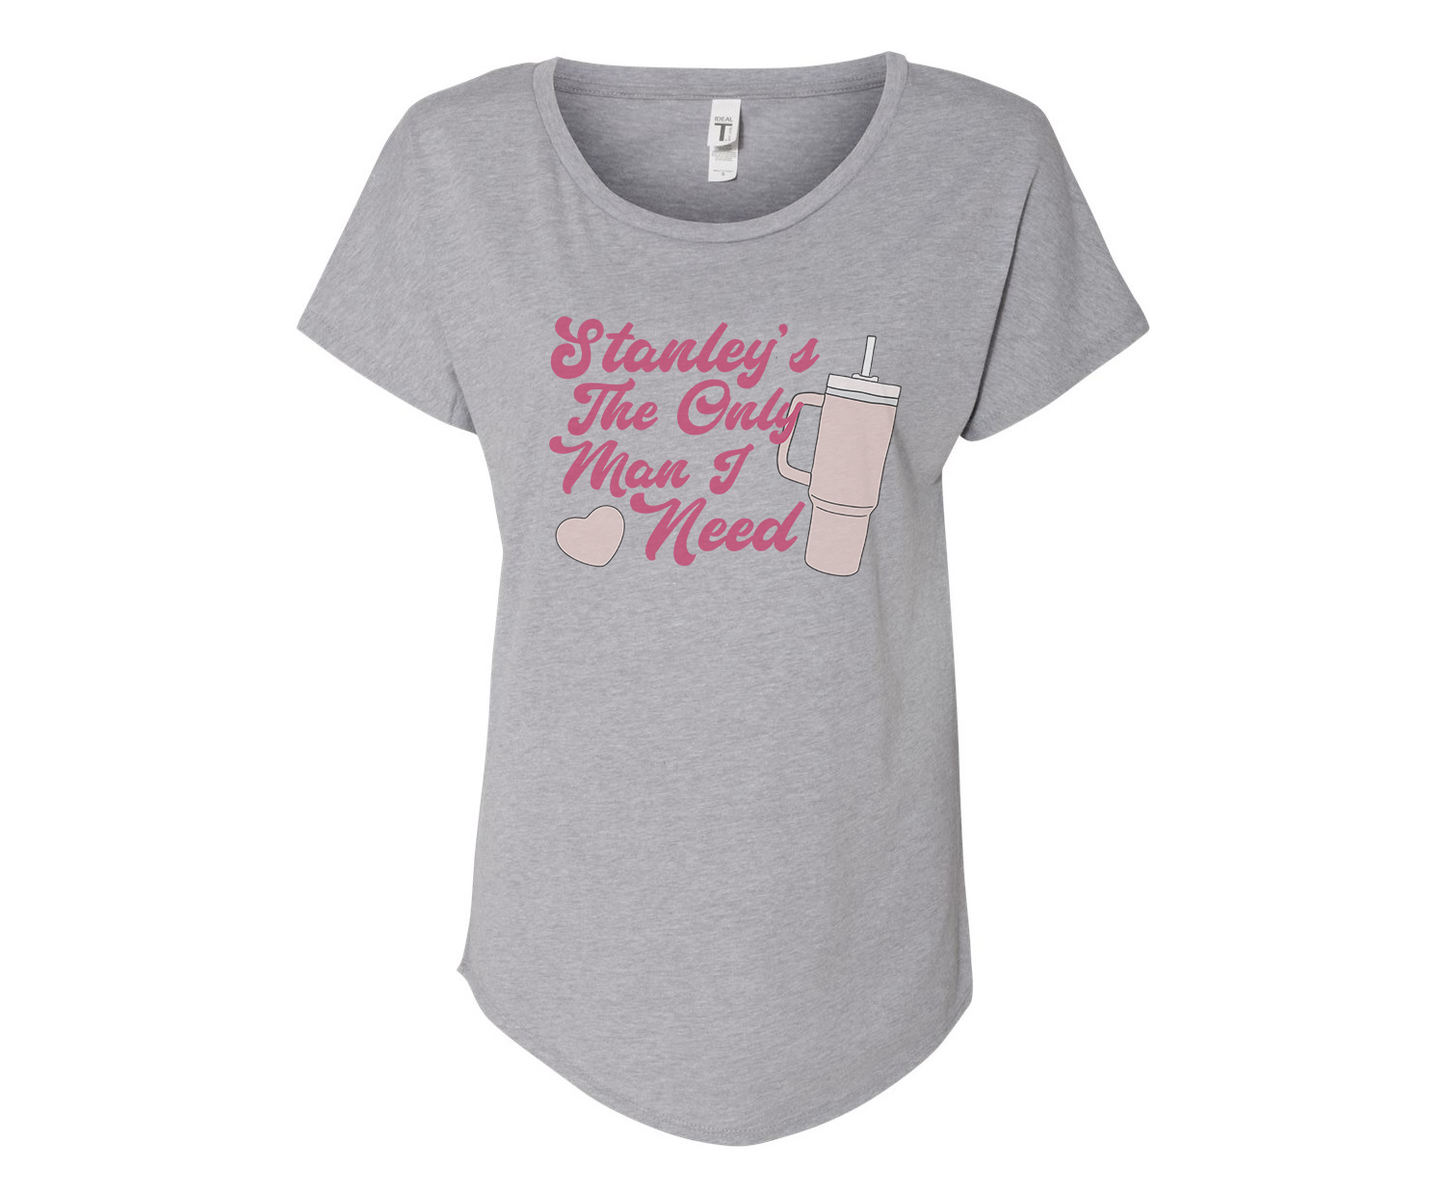 Stanley's The Only Man I Need Ladies Tee Shirt - In Grey & White